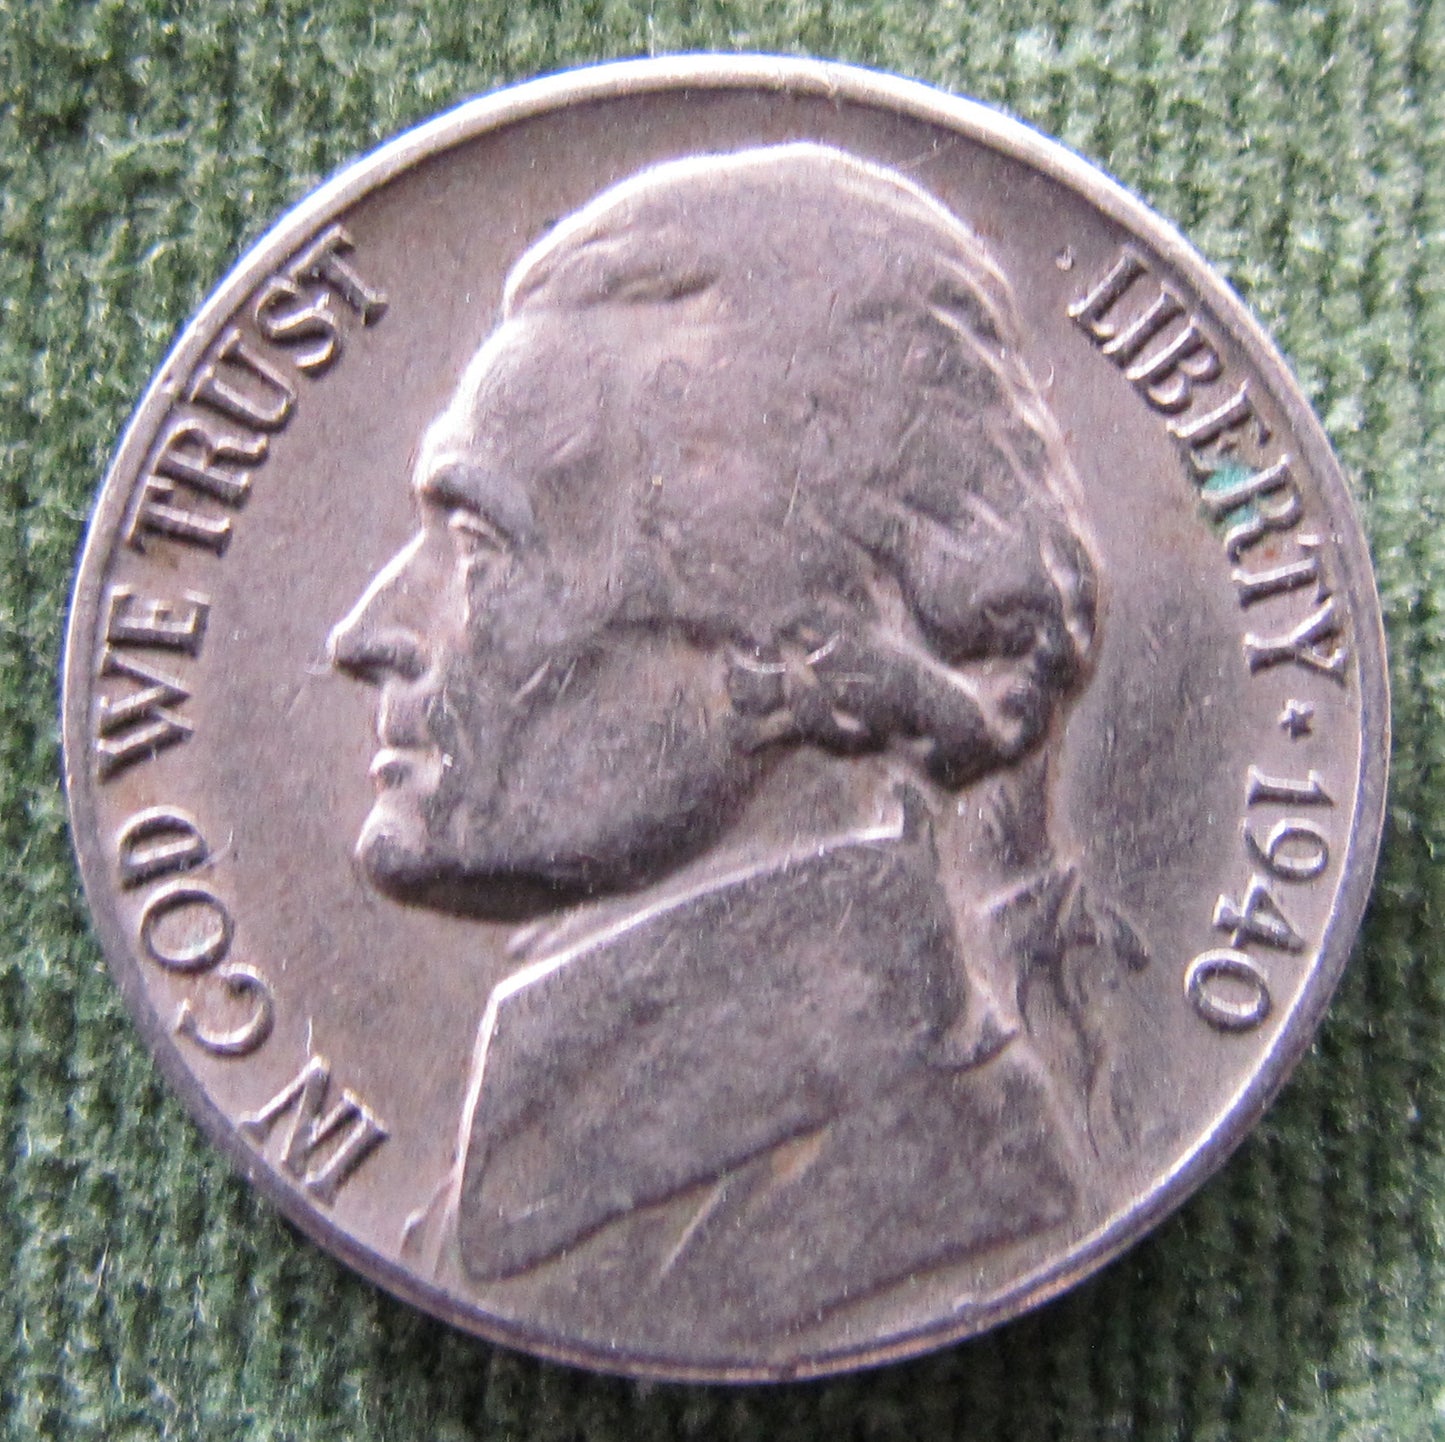 USA American 1940 S Nickel Jefferson Coin - Circulated